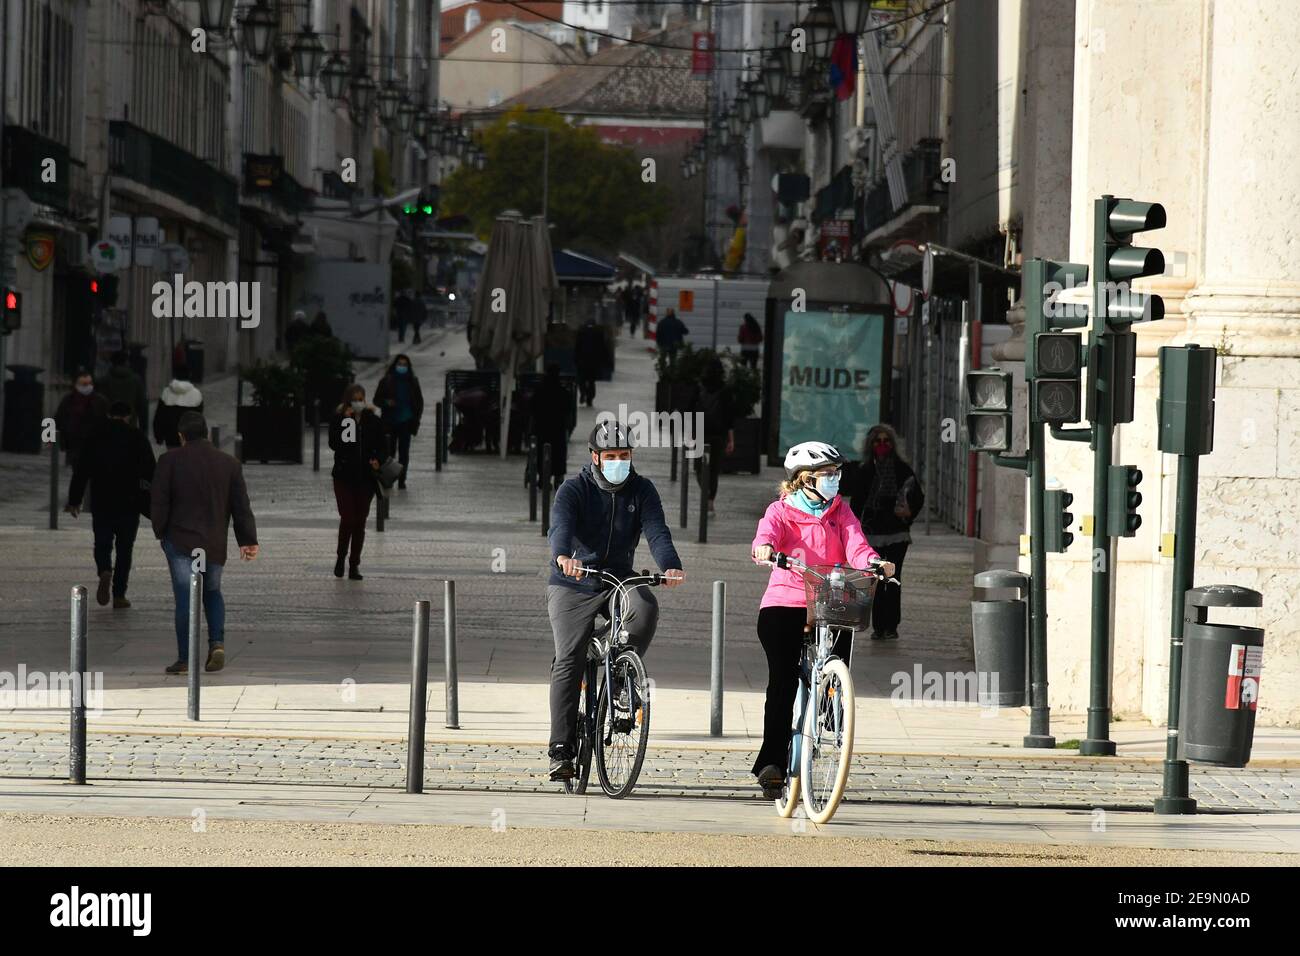 Lisbon, Portugal. 3rd Feb, 2021. Two people wearing face masks ride bicycles near Praça de Comercio in Lisbon.Portugal has registered 13,740 deaths and 755,774 confirmed cases since the beginning of the pandemic according to the bulletin of the General Health Department Credit: Jorge Castellanos/SOPA Images/ZUMA Wire/Alamy Live News Stock Photo